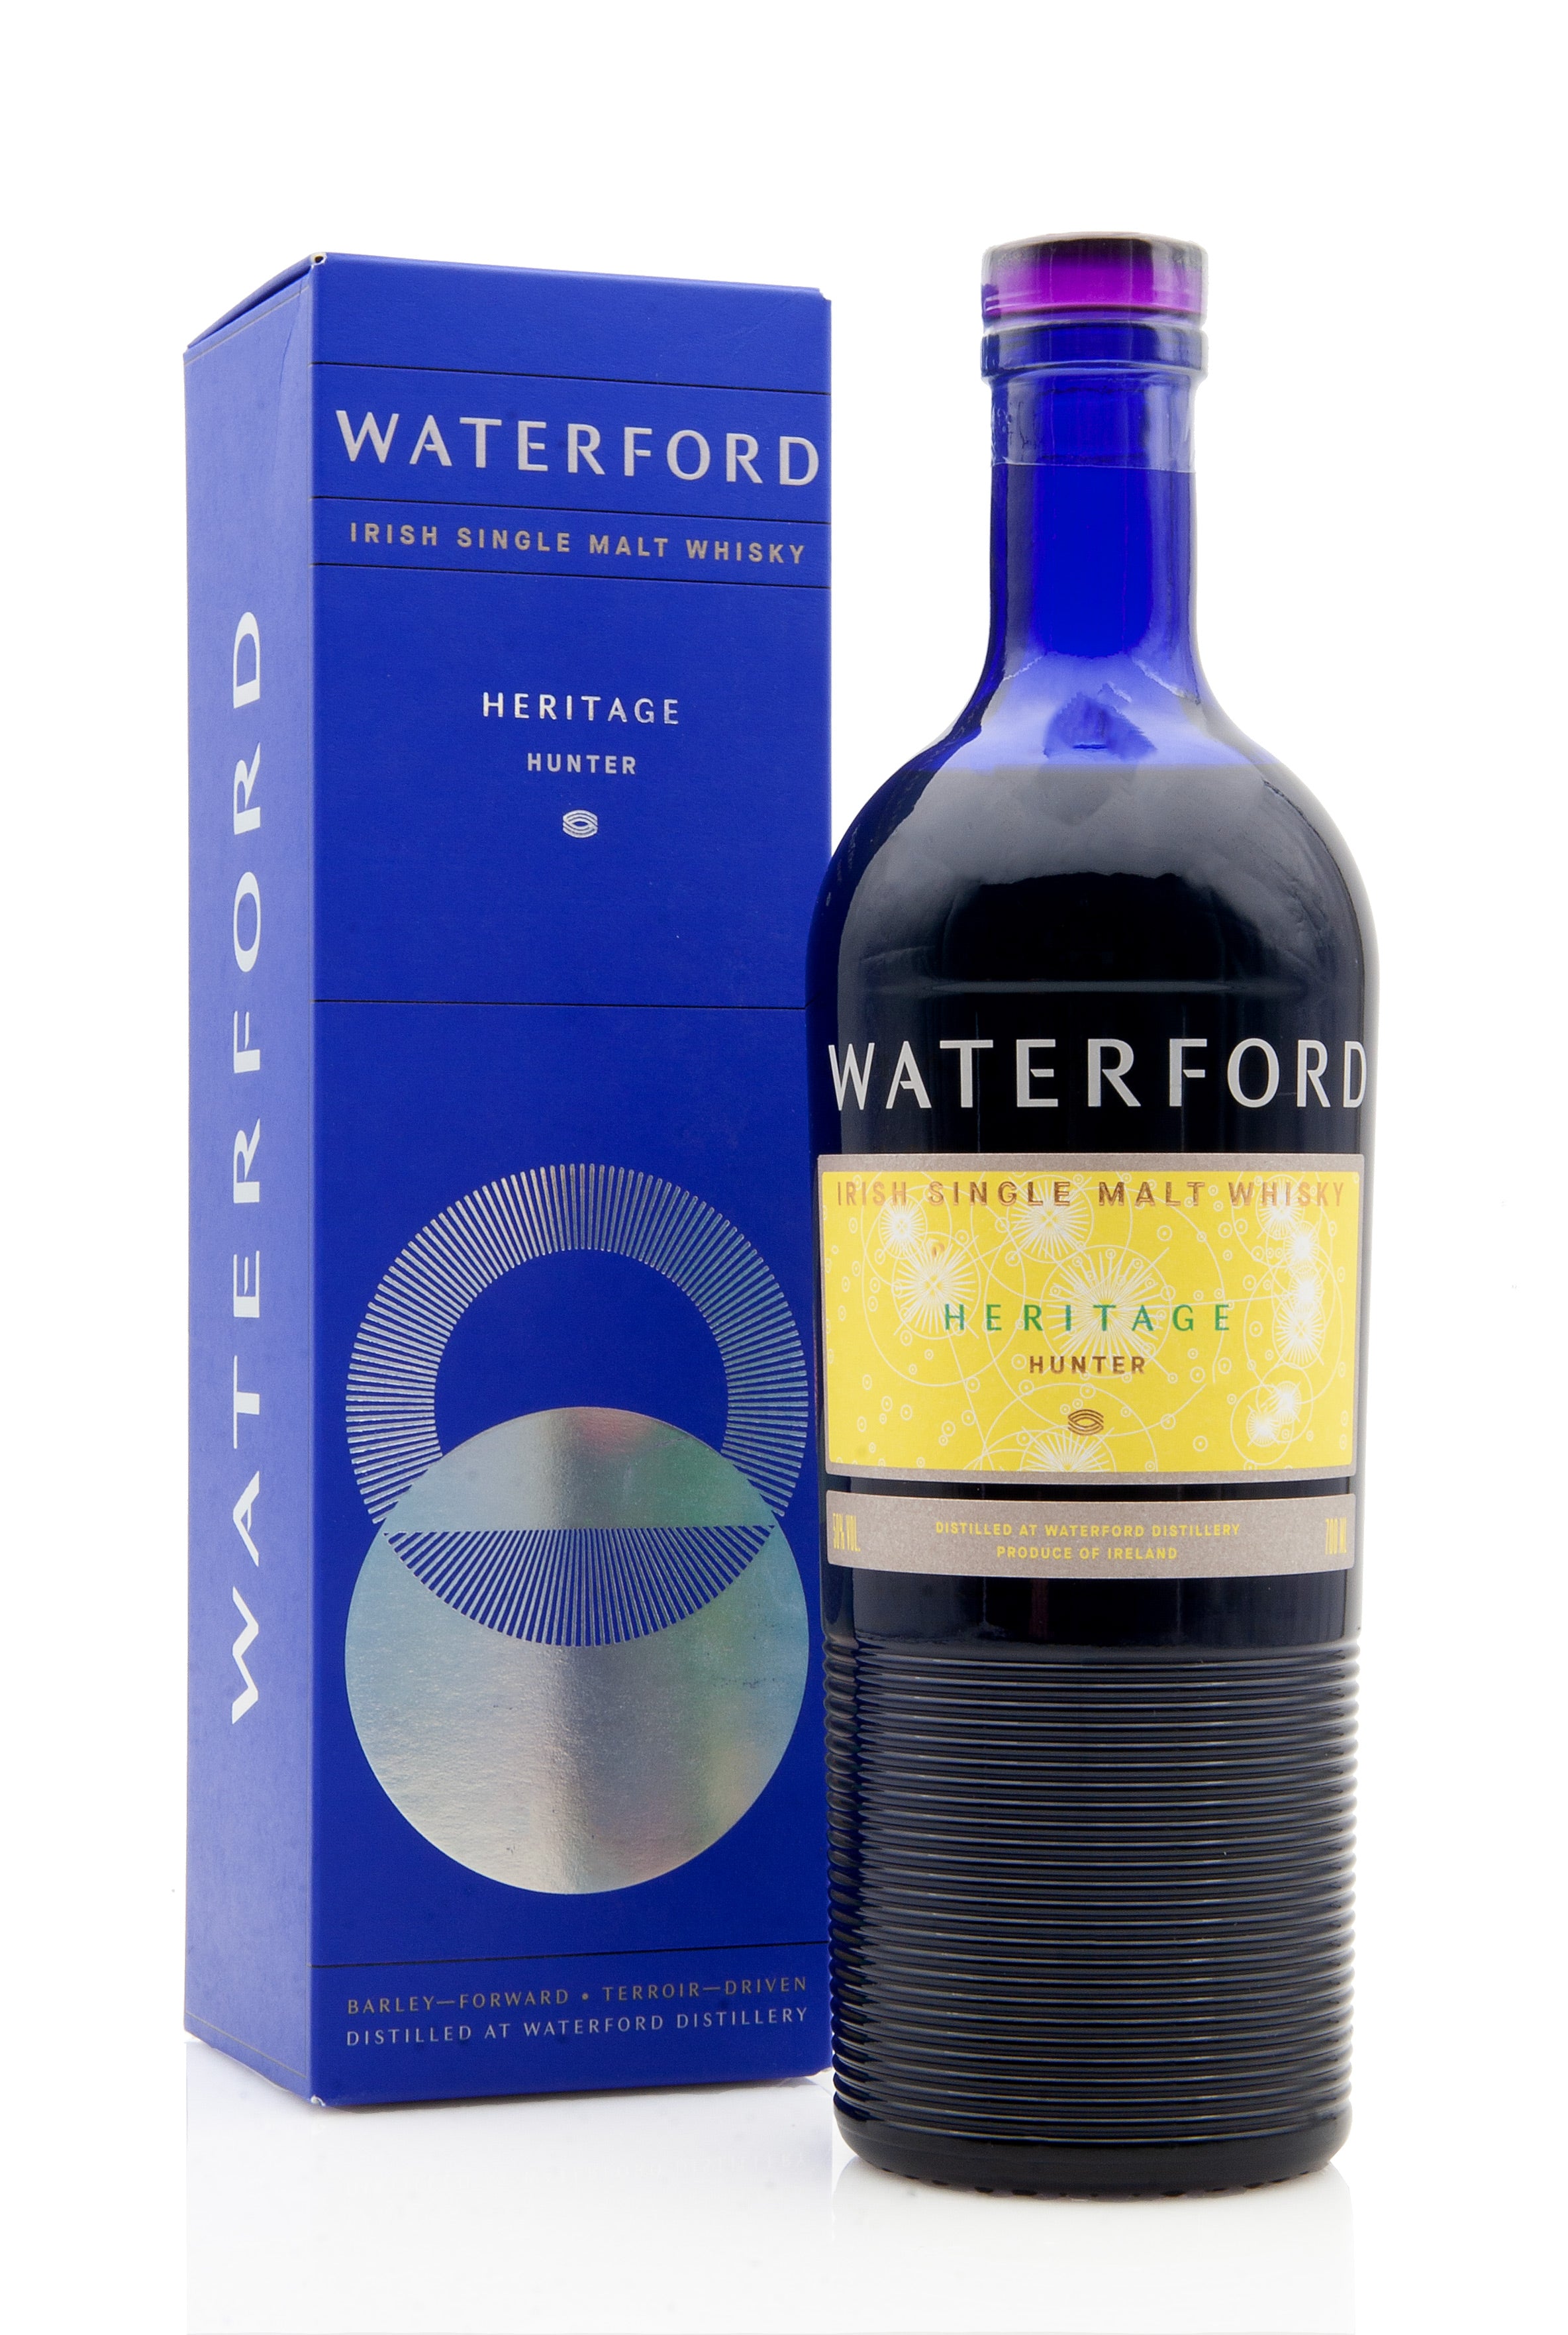 Waterford Heritage Hunter 1.1 Irish Whisky | Abbey Whisky Online